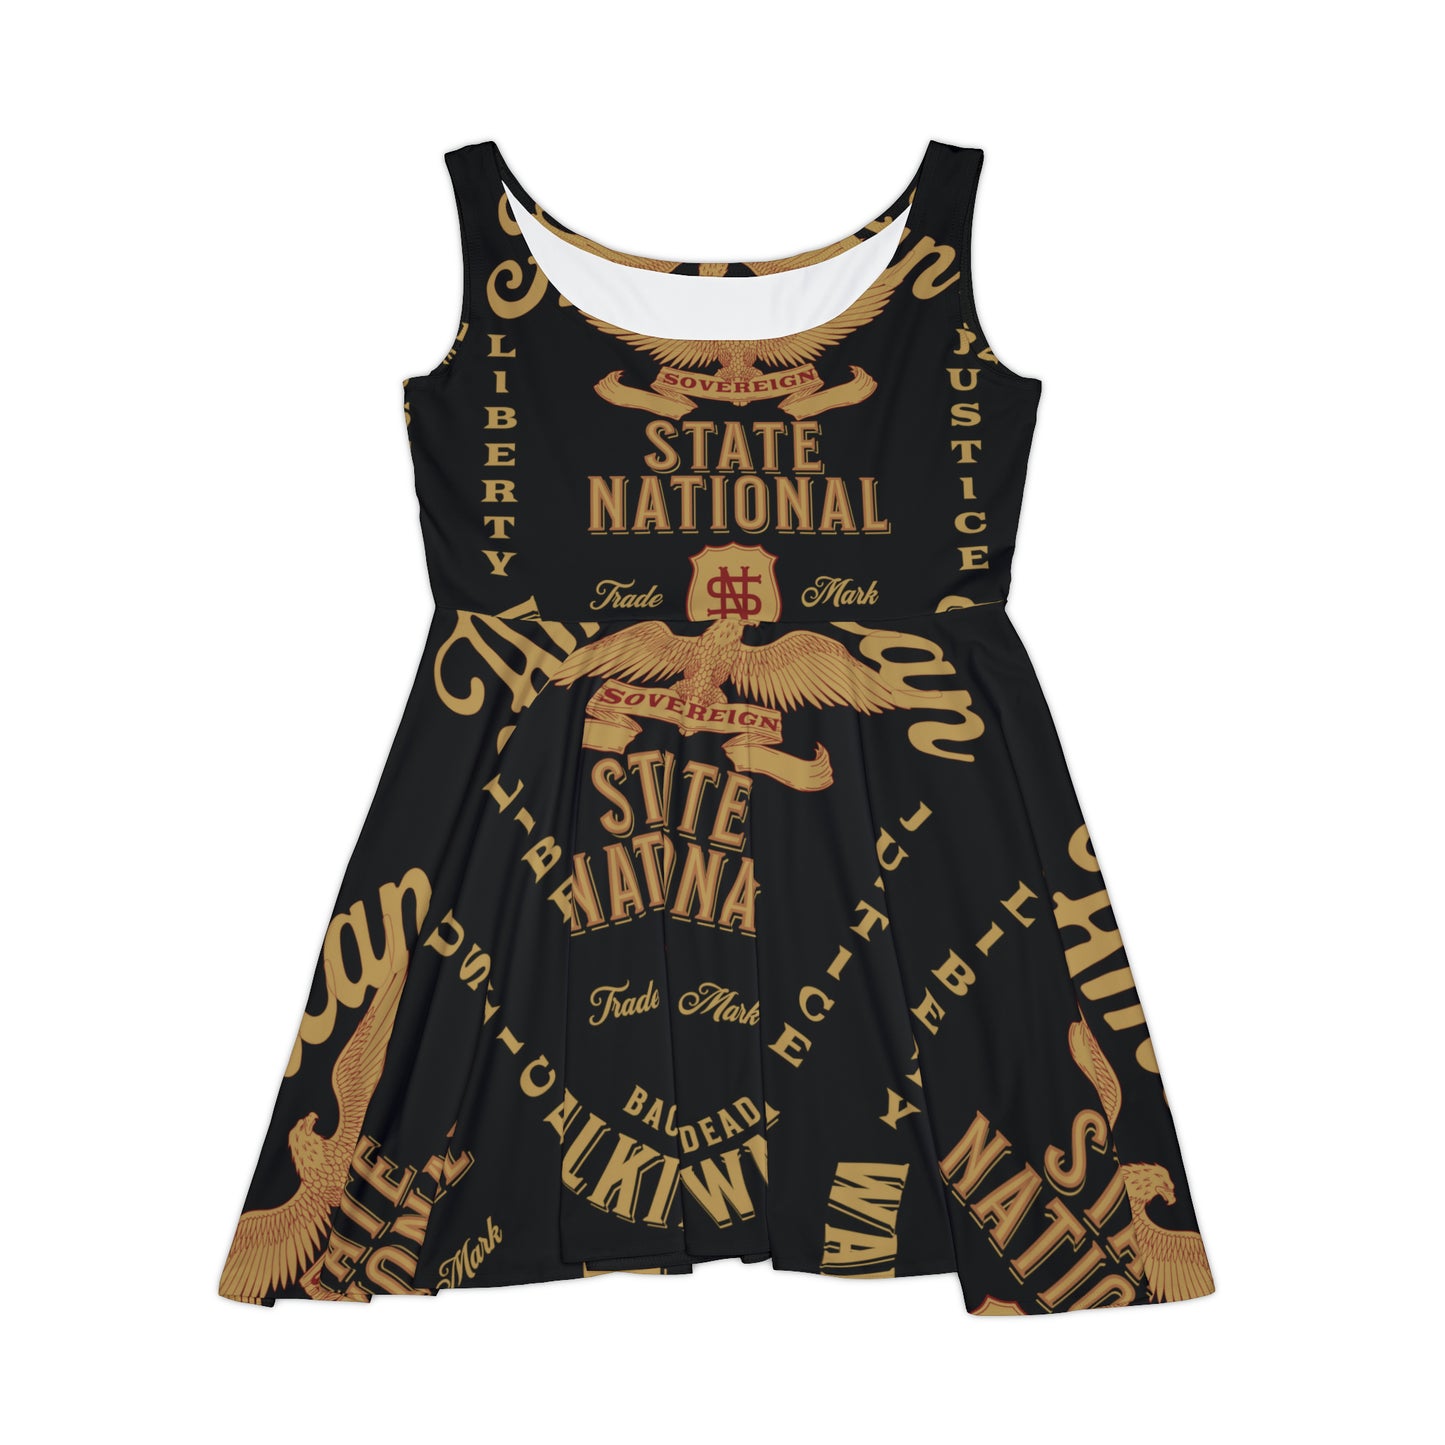 American State National Dress (Black/Gold)